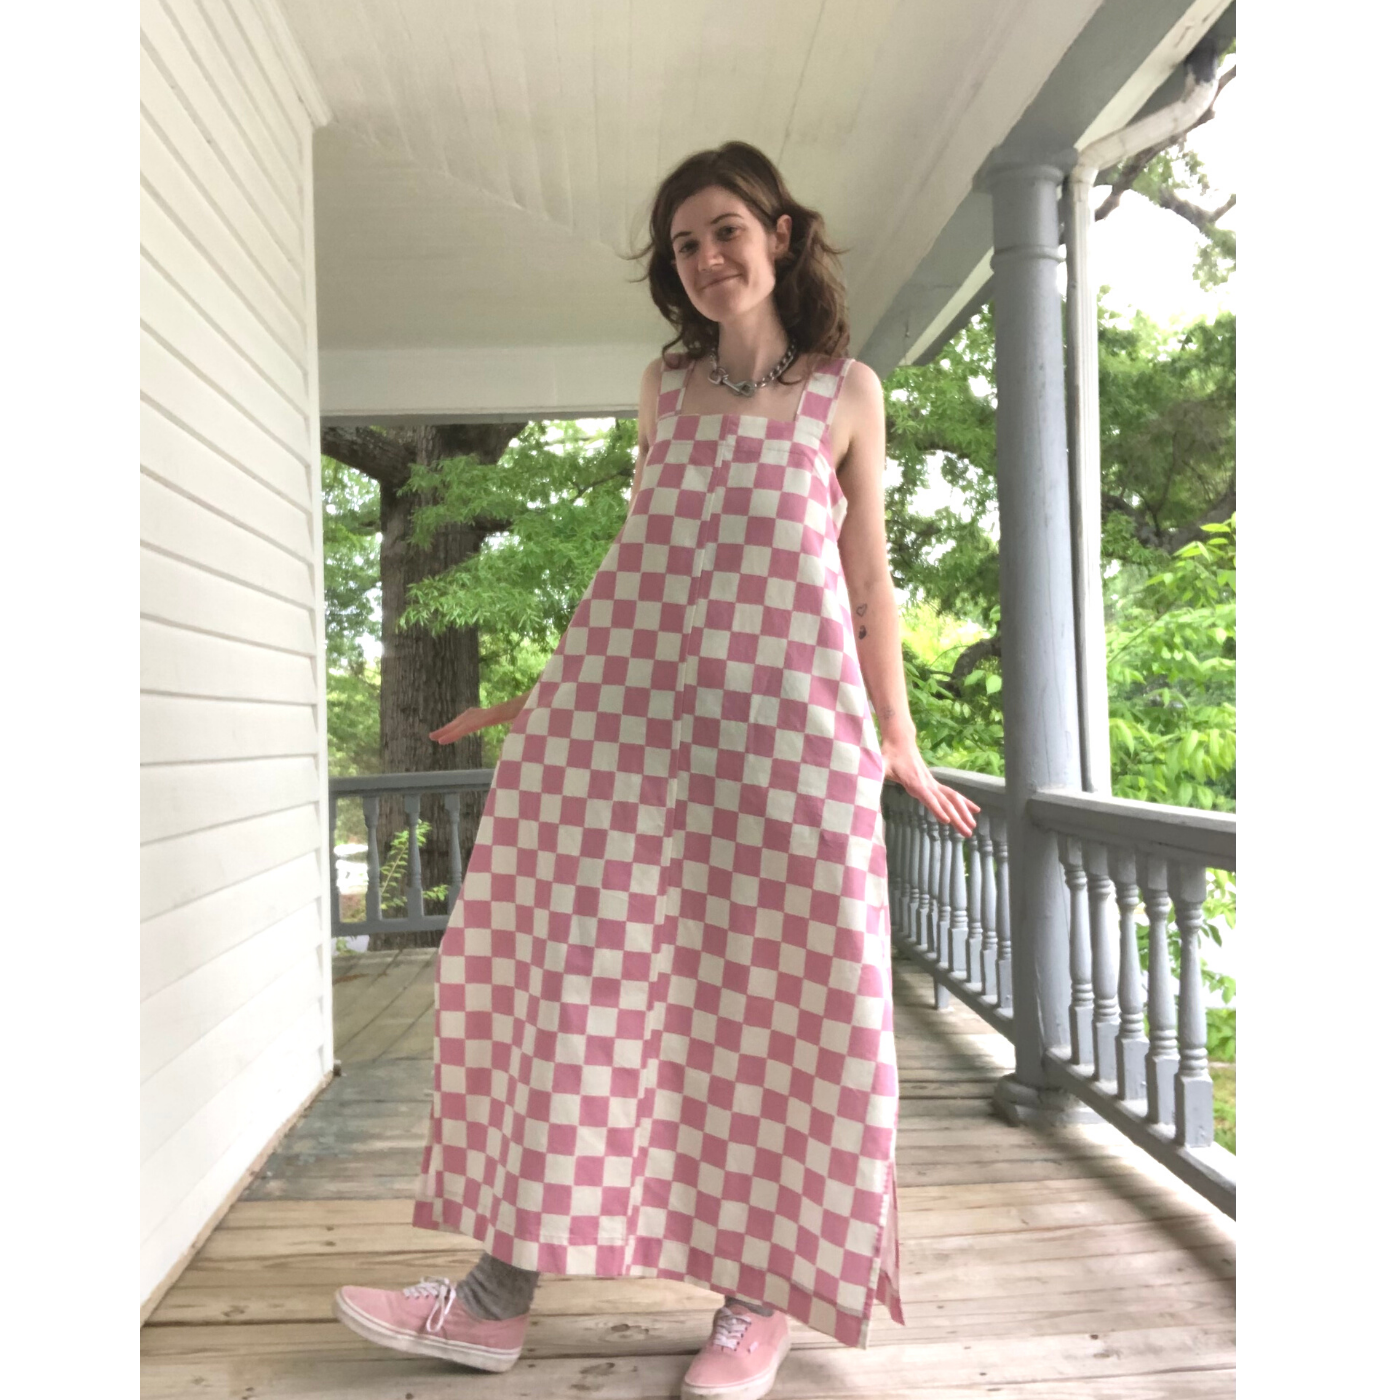 Lizard stands on a front porch with white walls, ceiling and railing and a wooden floor and is smiling at the camera. They are wearing a long maxi dress down to their ankles featuring a white-and-pink checkerboard design.